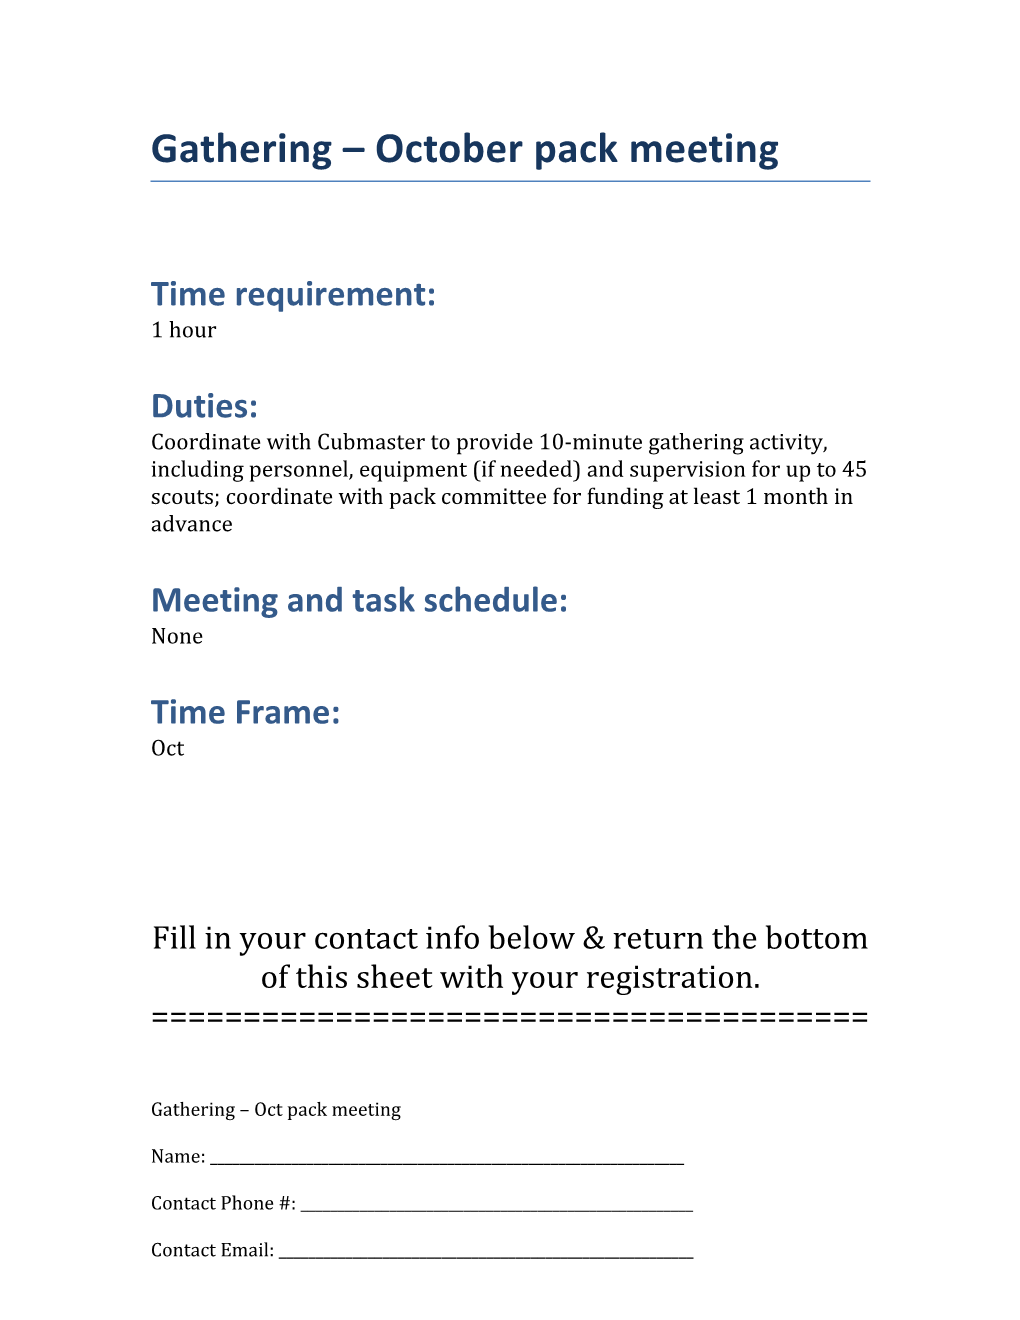 Meeting and Task Schedule